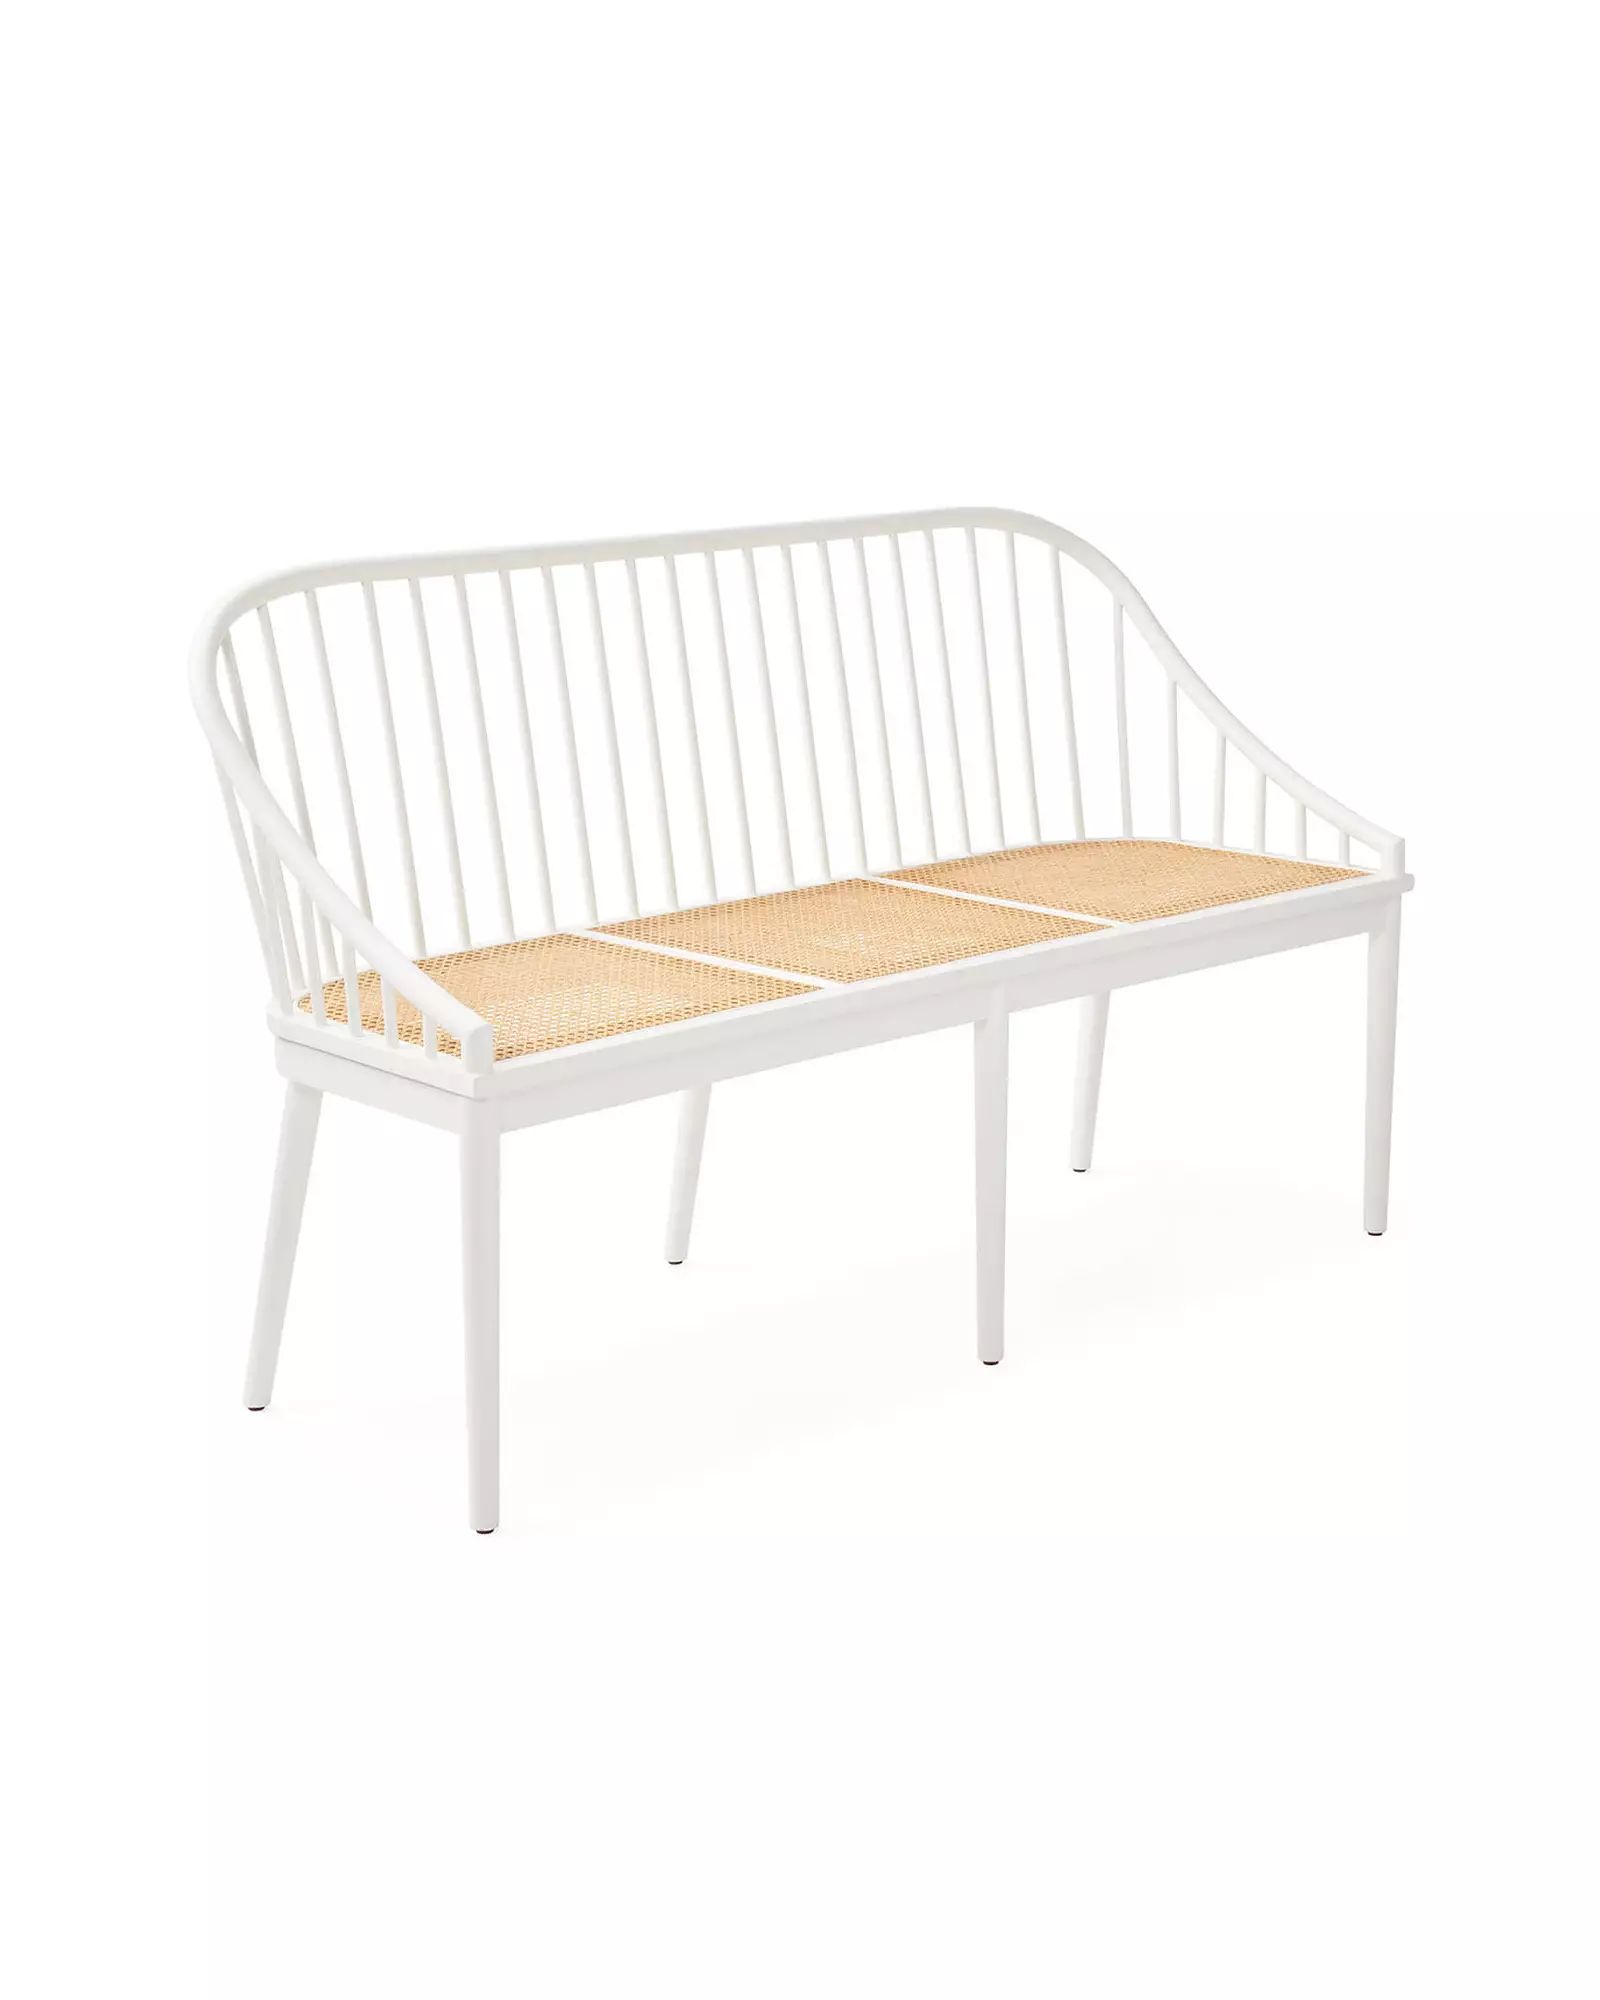 Millbrook Bench | Serena and Lily